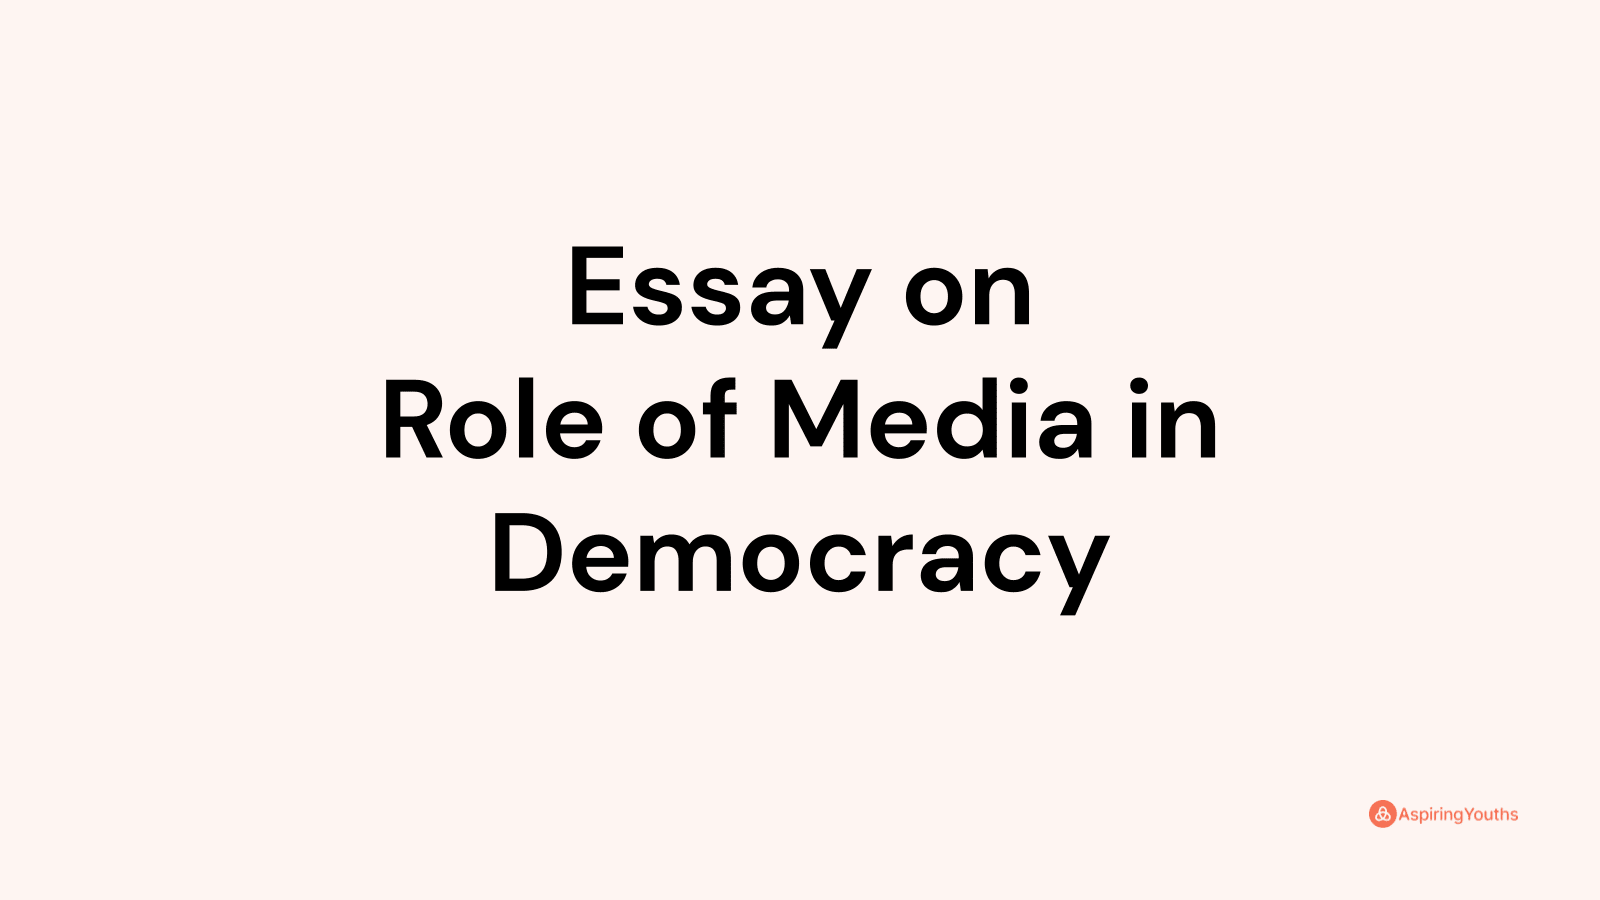 role of media in democracy essay in 100 words